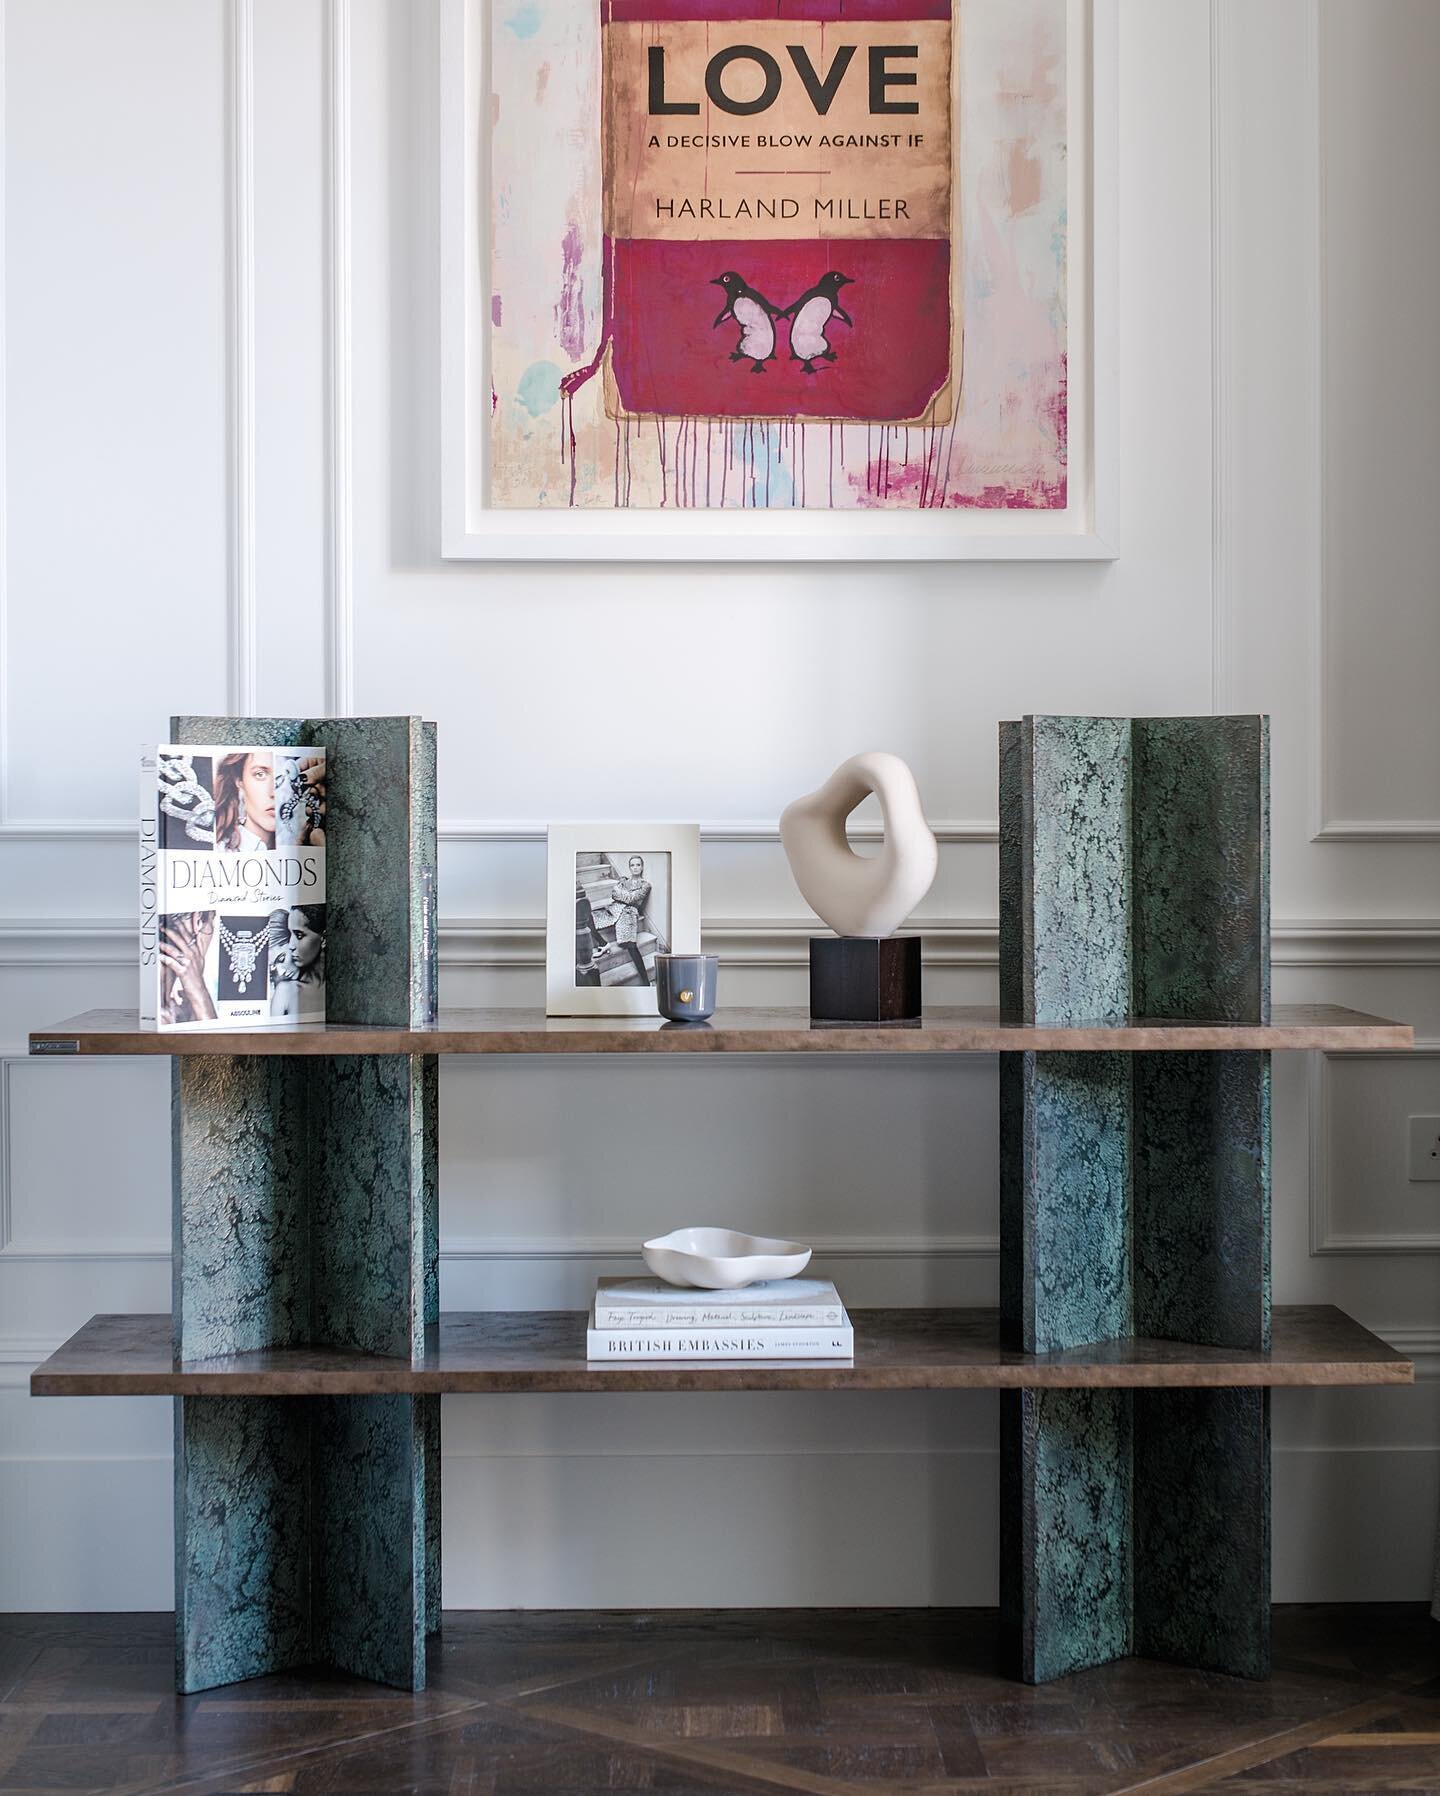 Our Bronze shelving unit for House of Walpole. 

Flat Antique Bronze shelves contrasting beautifully against the Textured Bronze Verdigris uprights. 

Designed by @oliver_burns